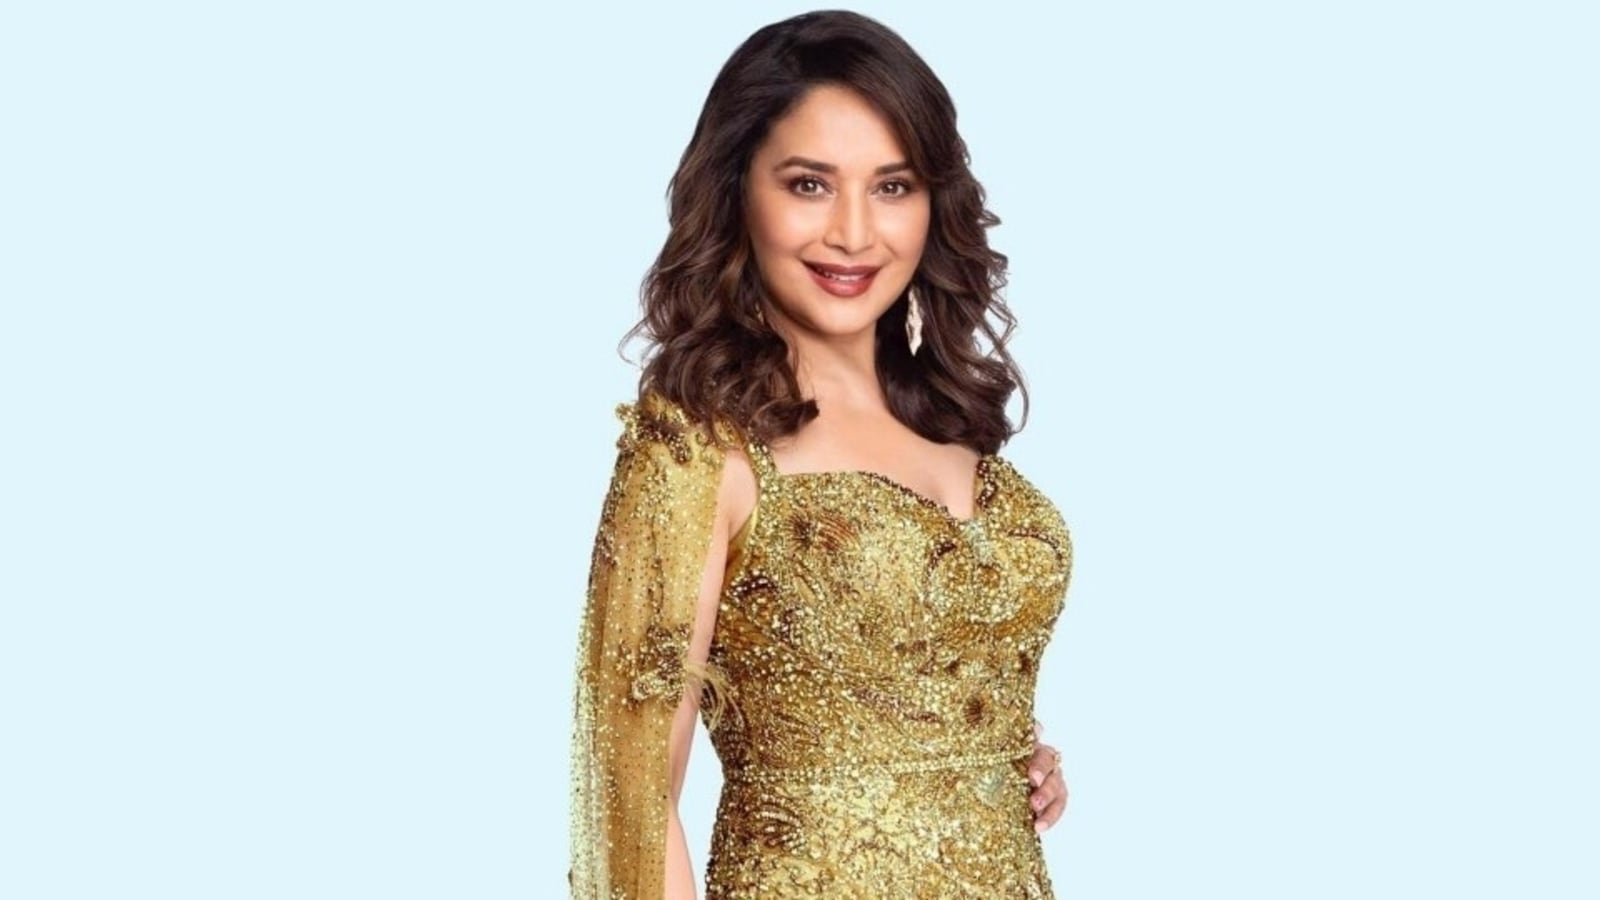 Madhuri Dixit’s golden girl look for Jhalak Dikhhla Jaa in thigh-slit gown makes fans say ‘beautiful queen’. See pics | Fashion Trends